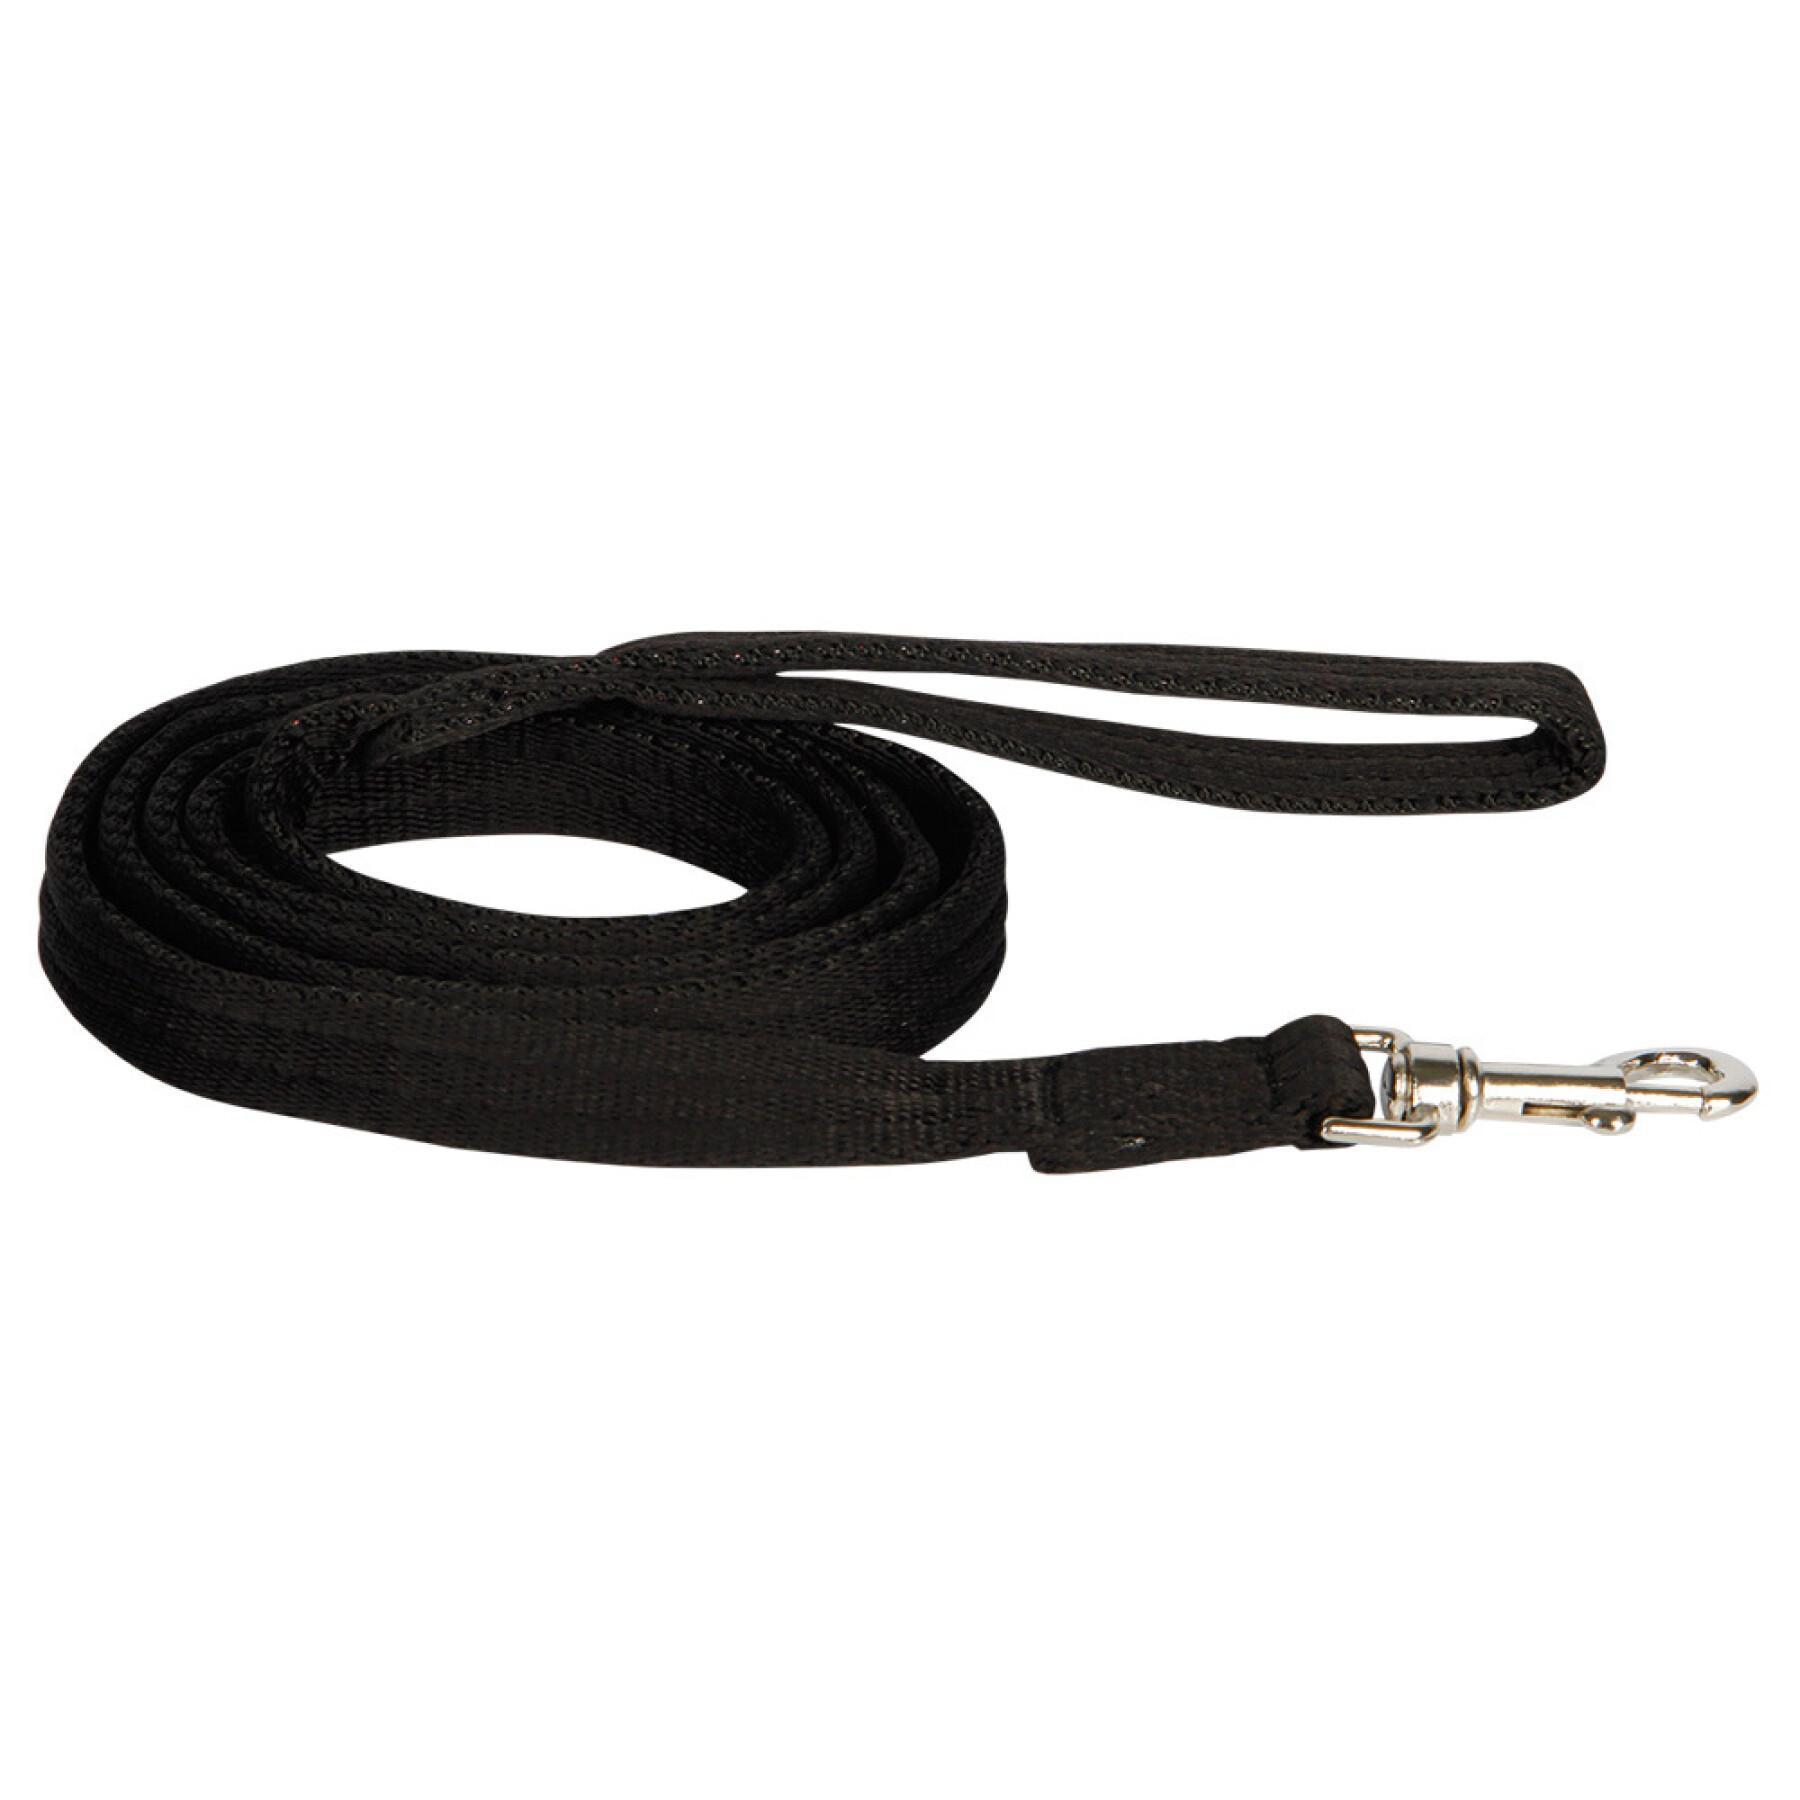 Horse riding lanyards with carabiner Harry's Horse Soft